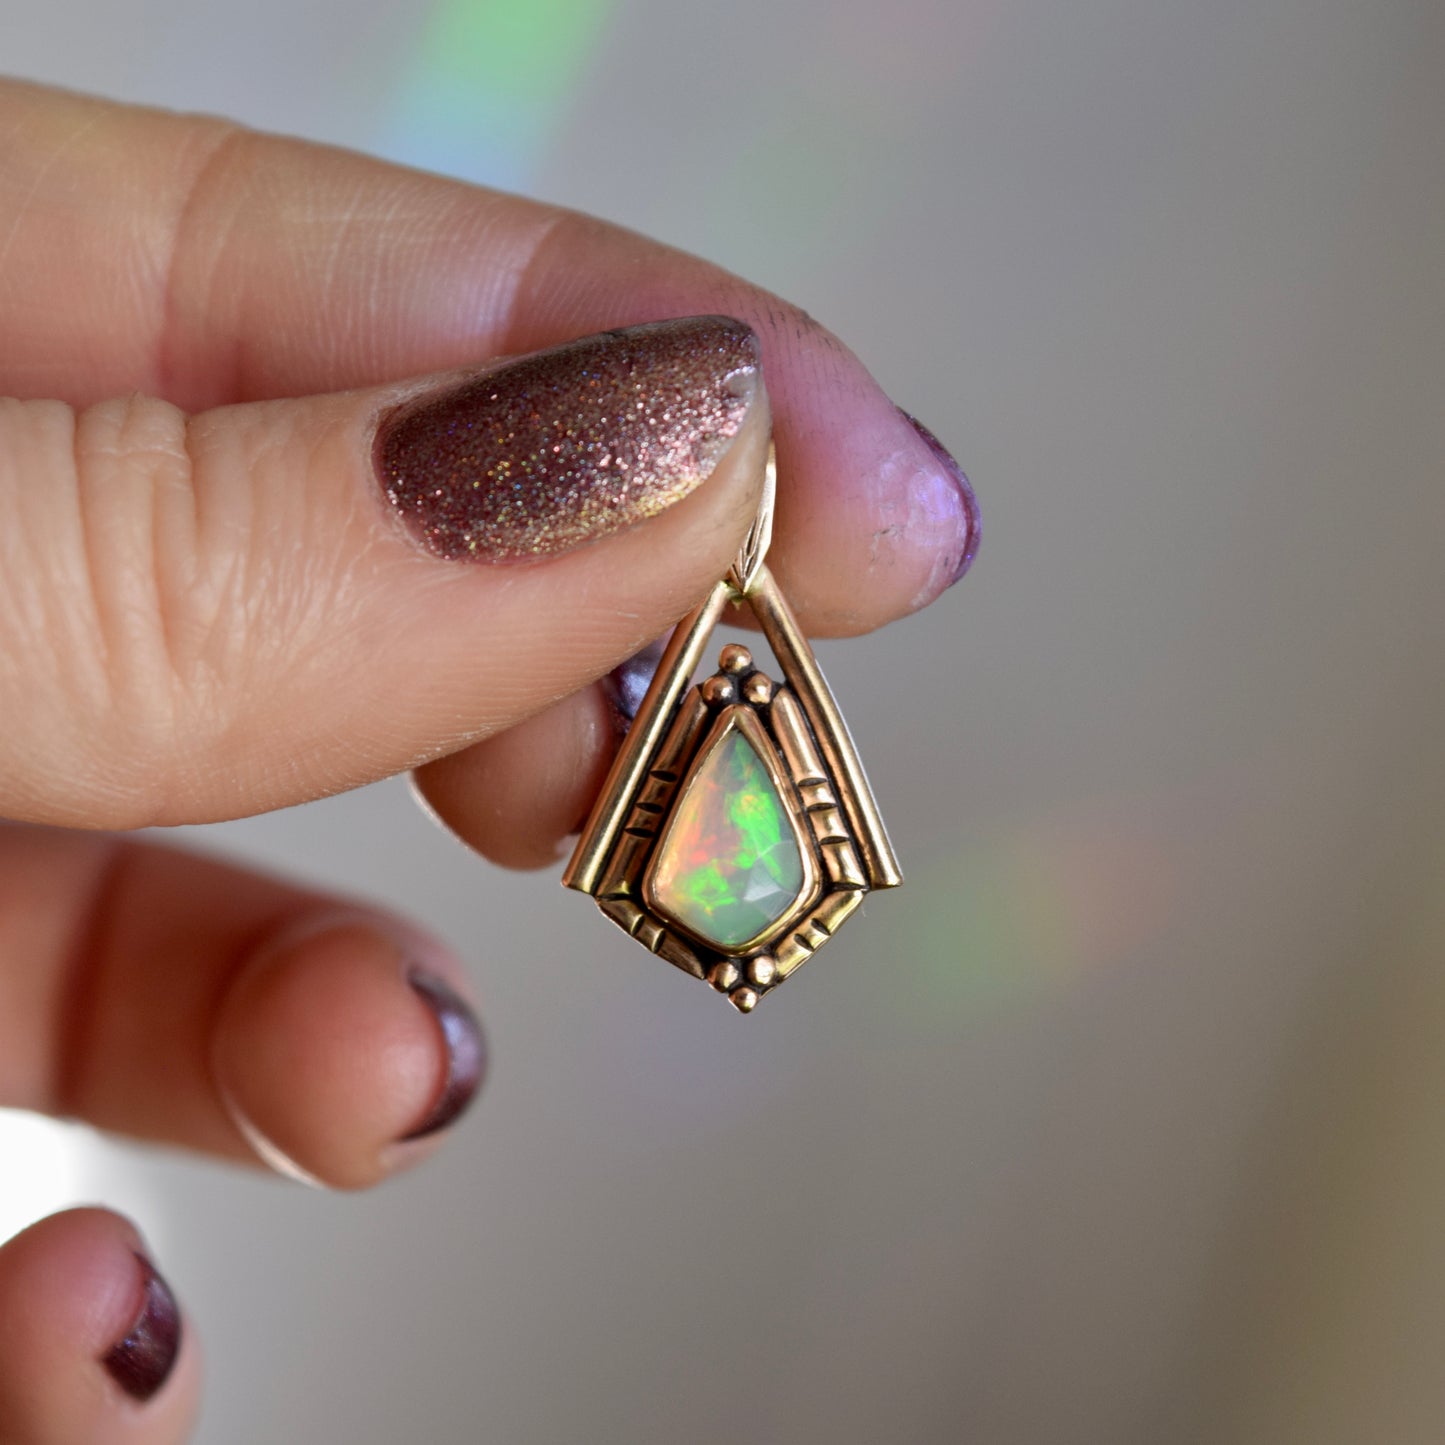 North Star Necklace with Rose Cut Ethiopian Opal and Yellow Gold Fill